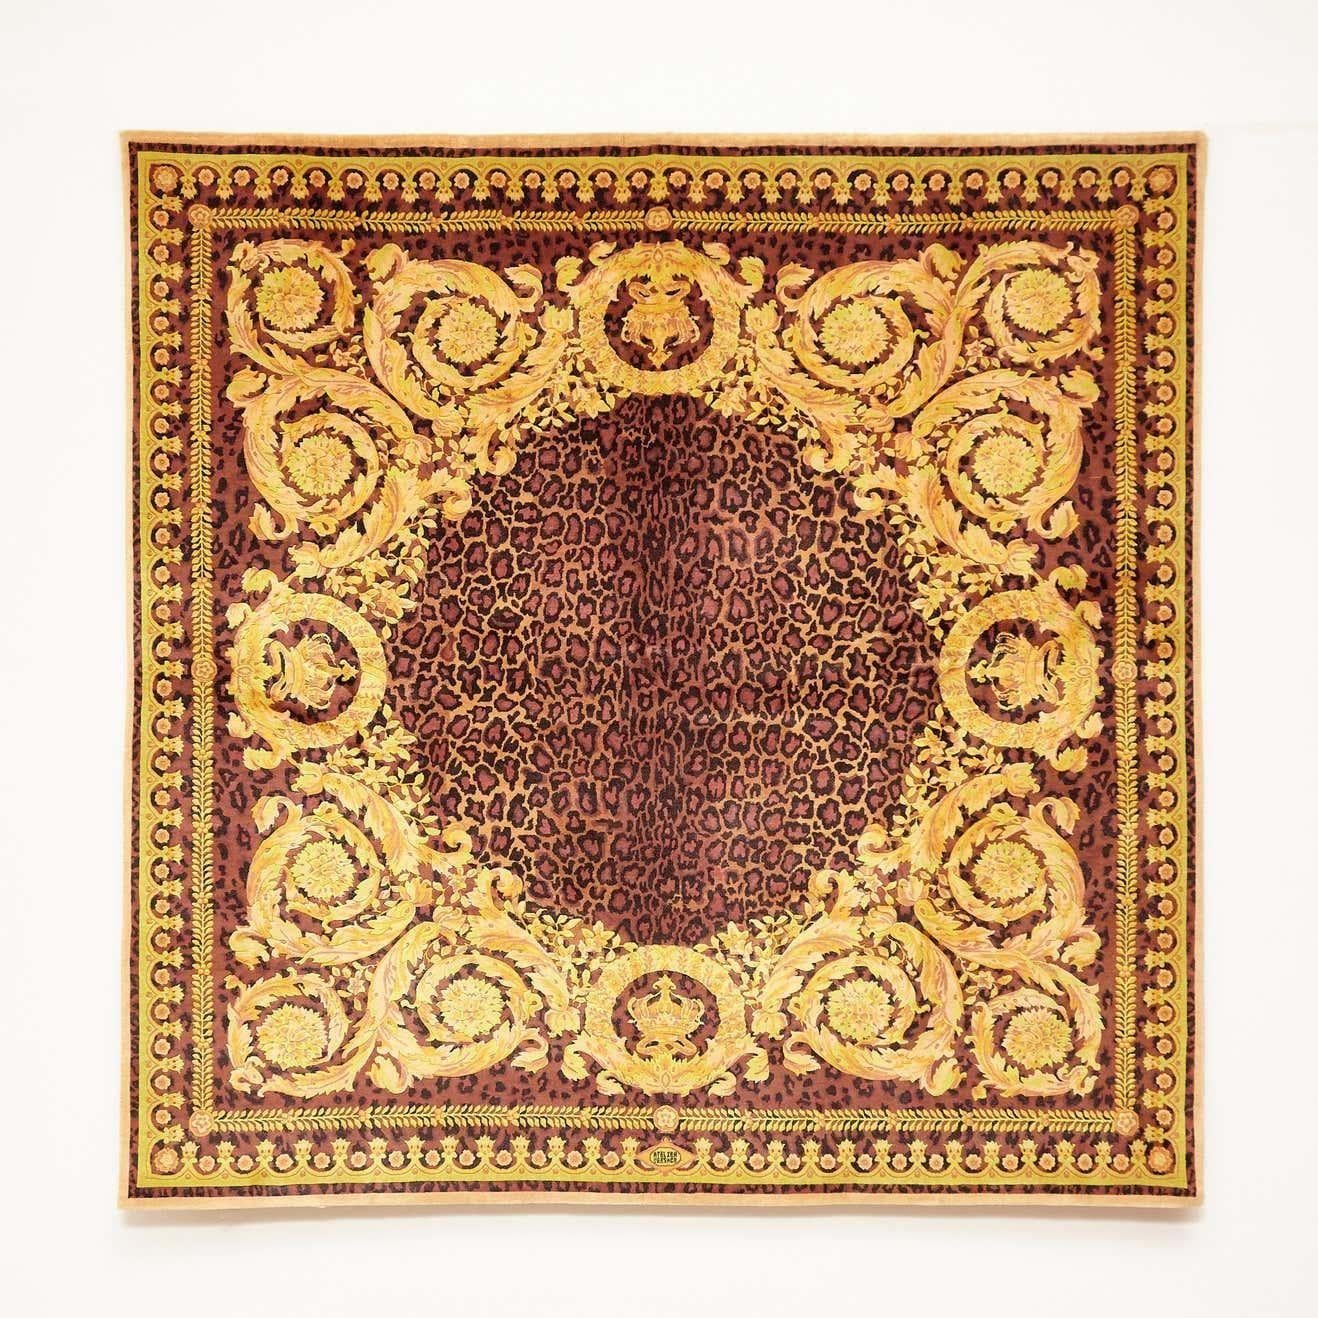 Gianni Versace Collection Rug Wild Barocco, Gold Leopard Animal Print, 1980 For Sale 12